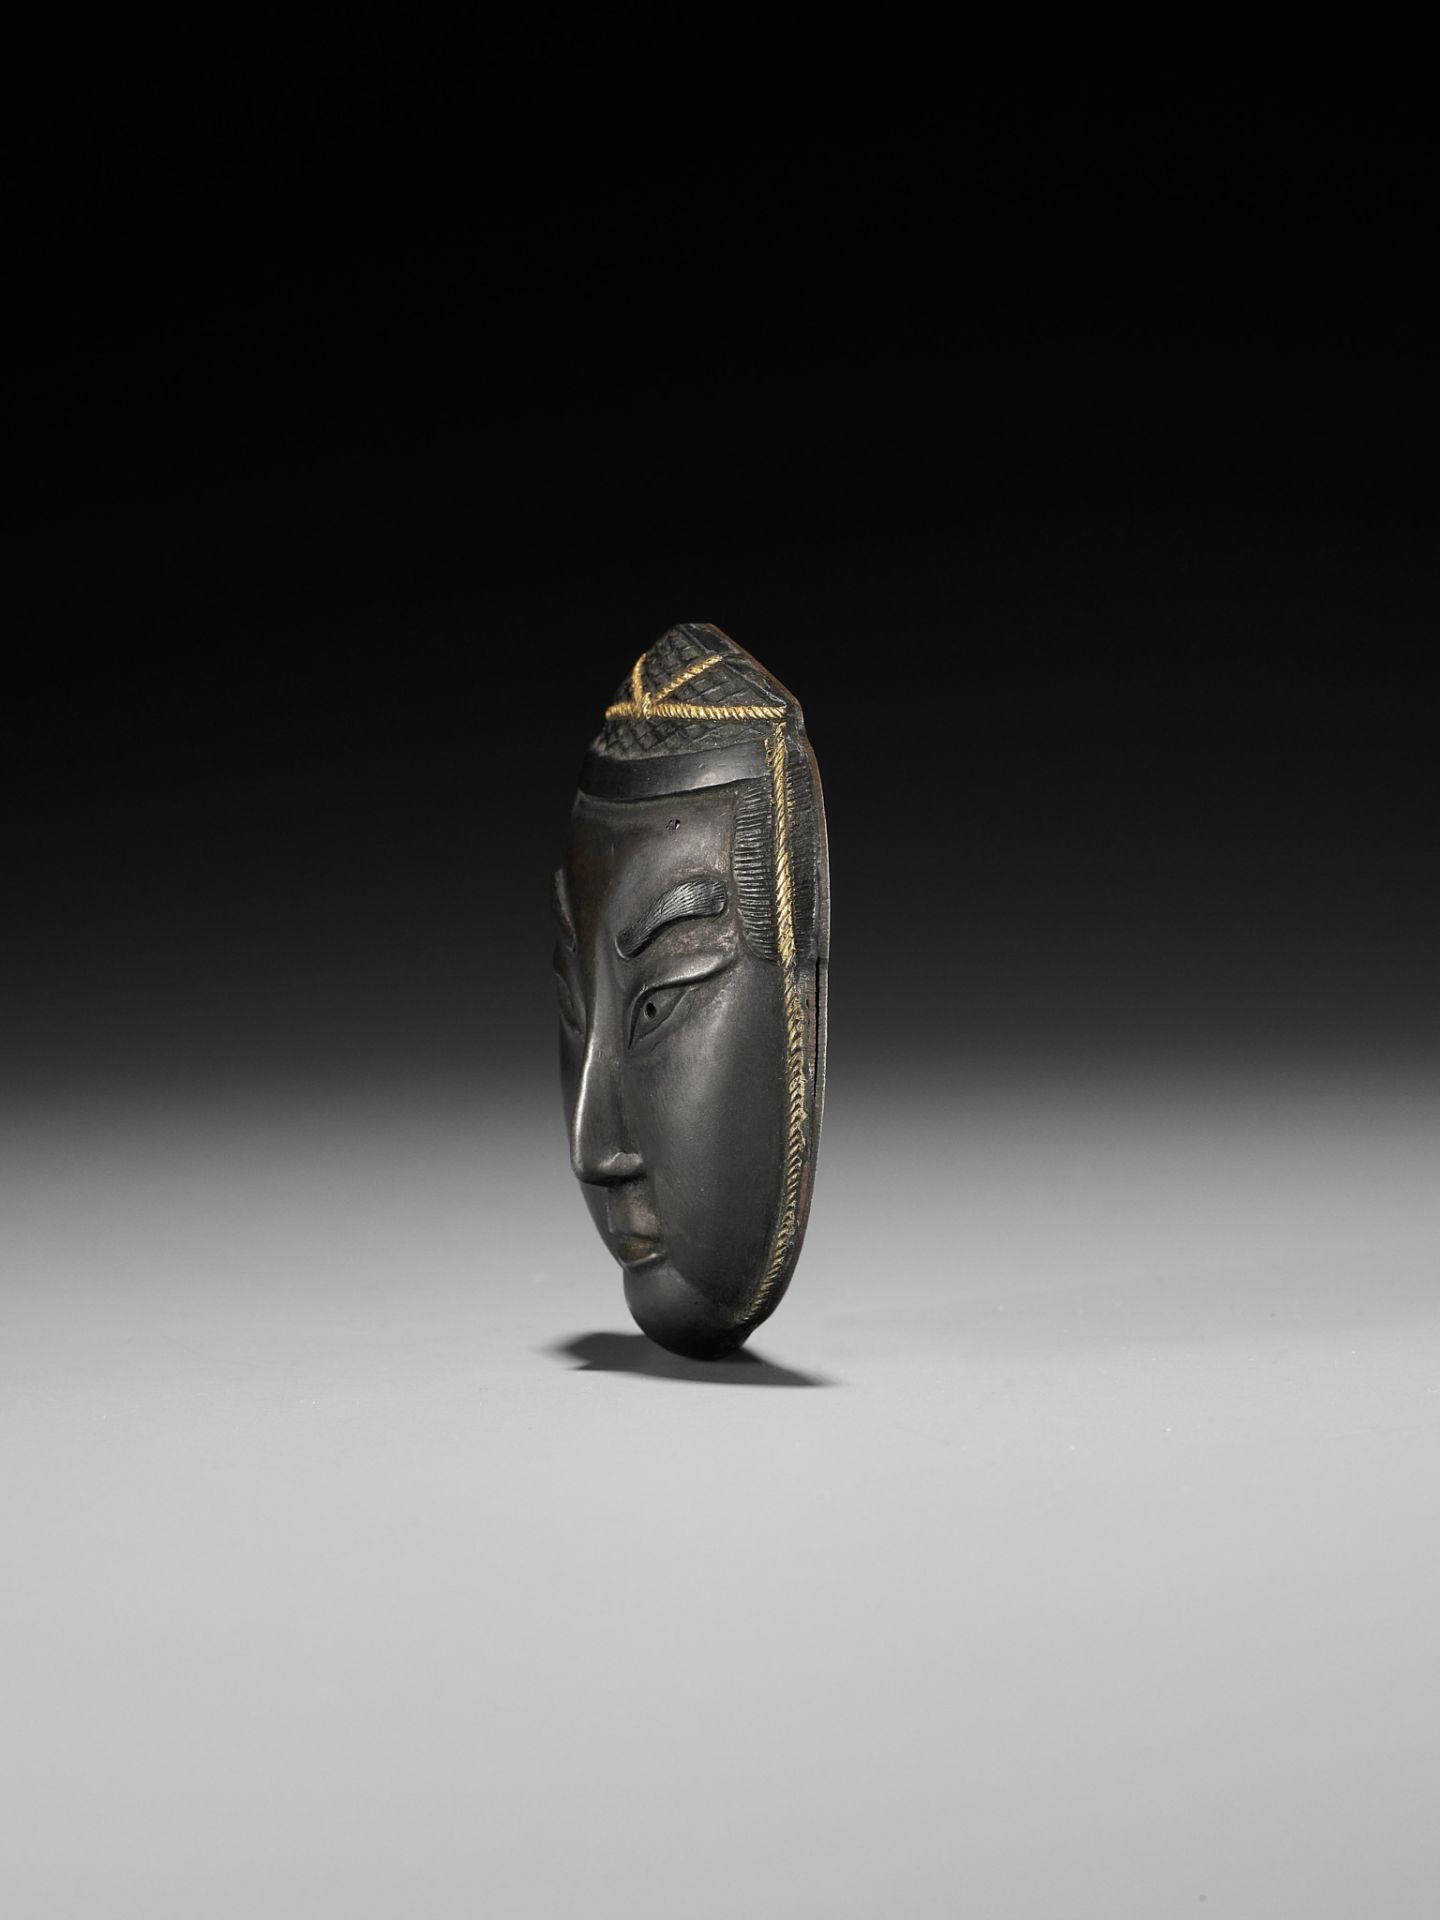 A RARE MIXED METAL NETSUKE DEPICTING THE HEAD OF A NOBLEMAN - Image 6 of 9